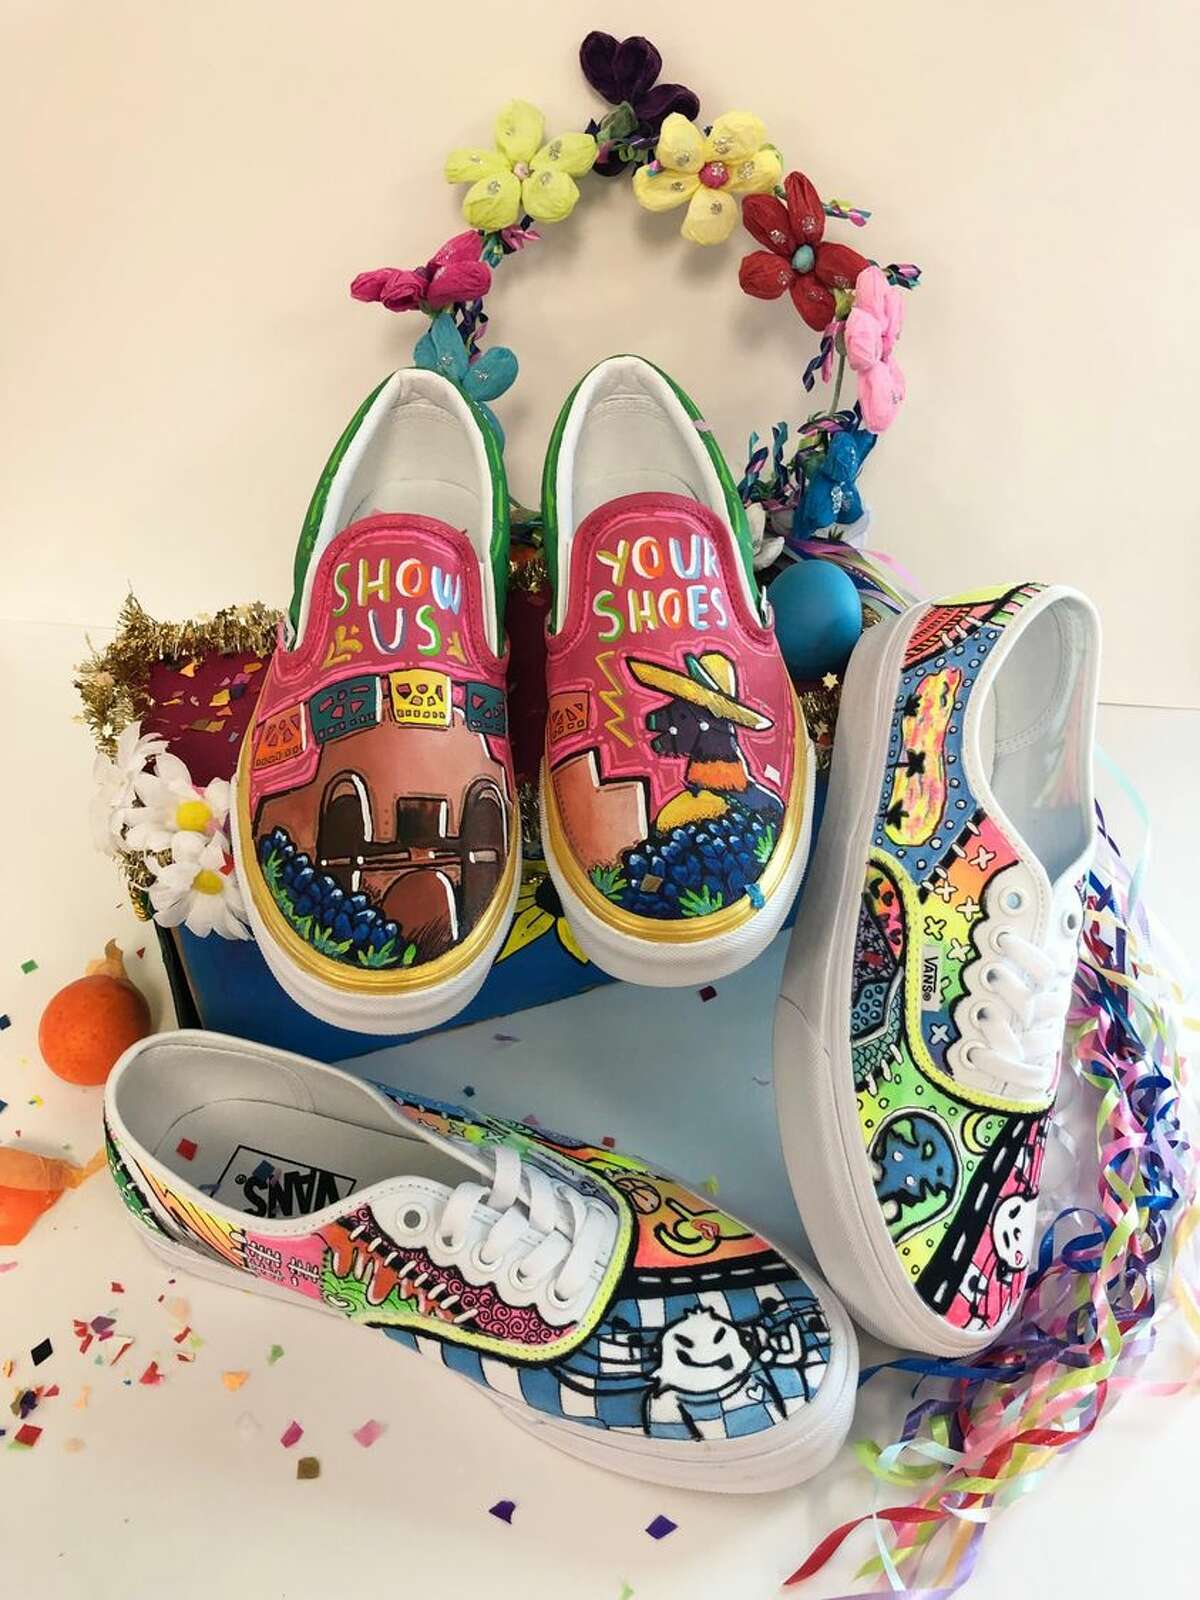 The Vans shoes two San Antonio students designed that could win $50,000 for Jay High School. 